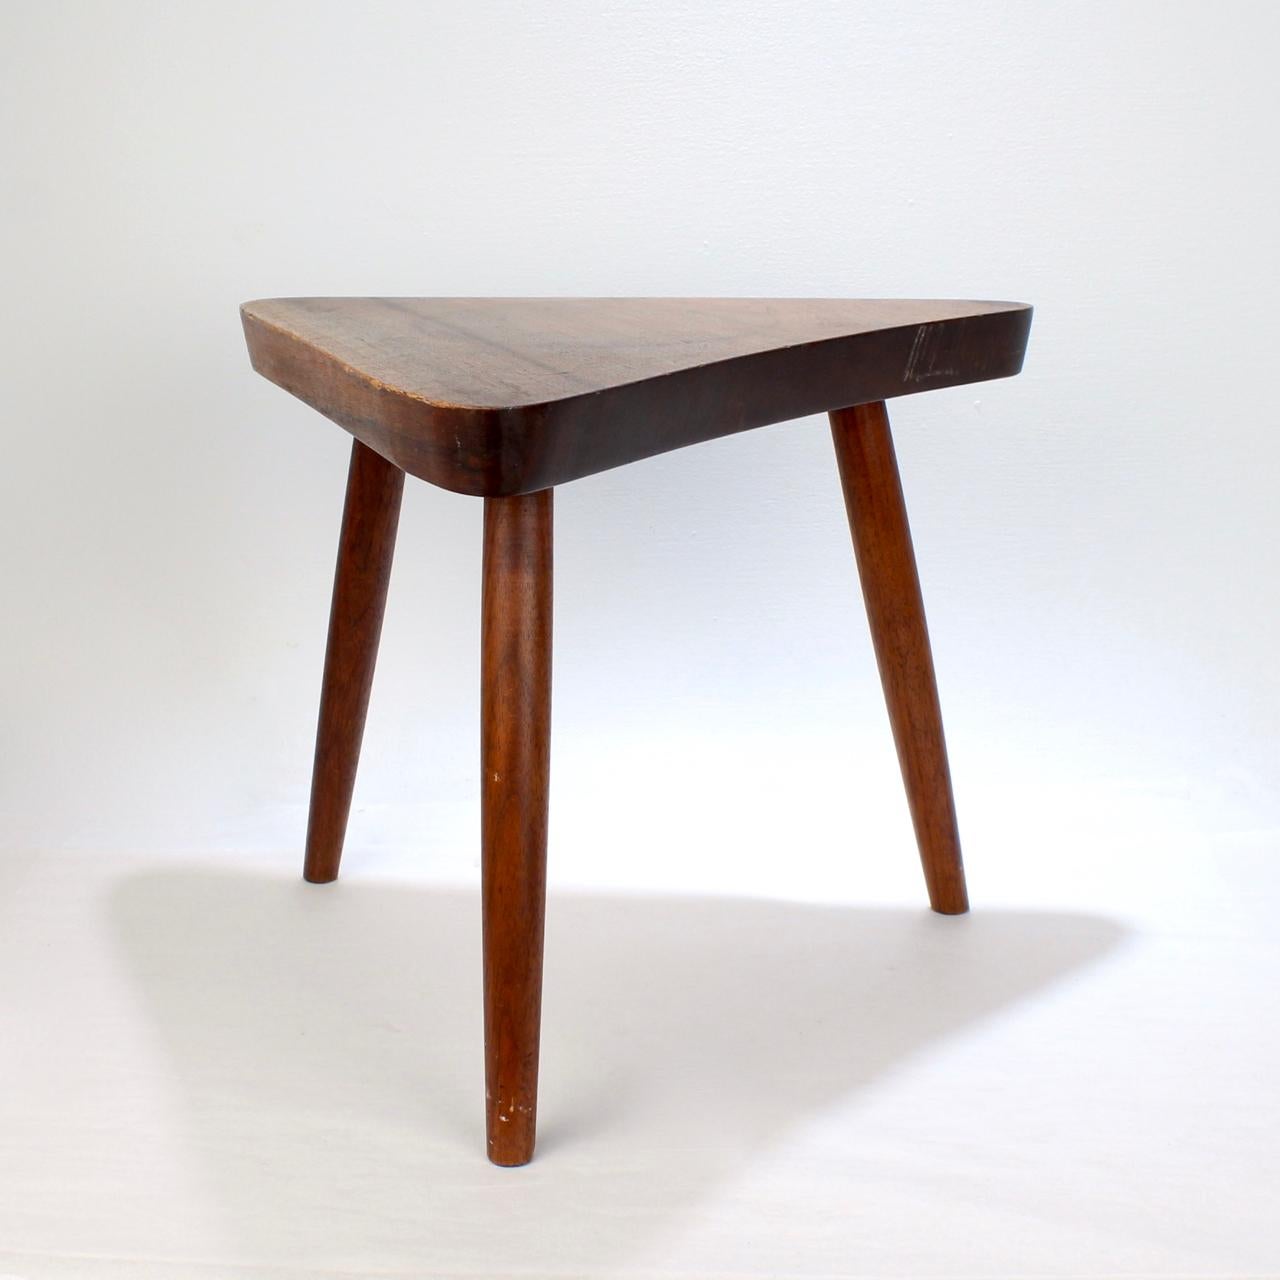 A wonderful walnut plank stool by George Nakashima.

With faint pencil scoring marks to the underside and original glue to the turned legs.

A wonderful fresh discovery from a small Bucks County, PA estate (that was clearly used as a plant stand